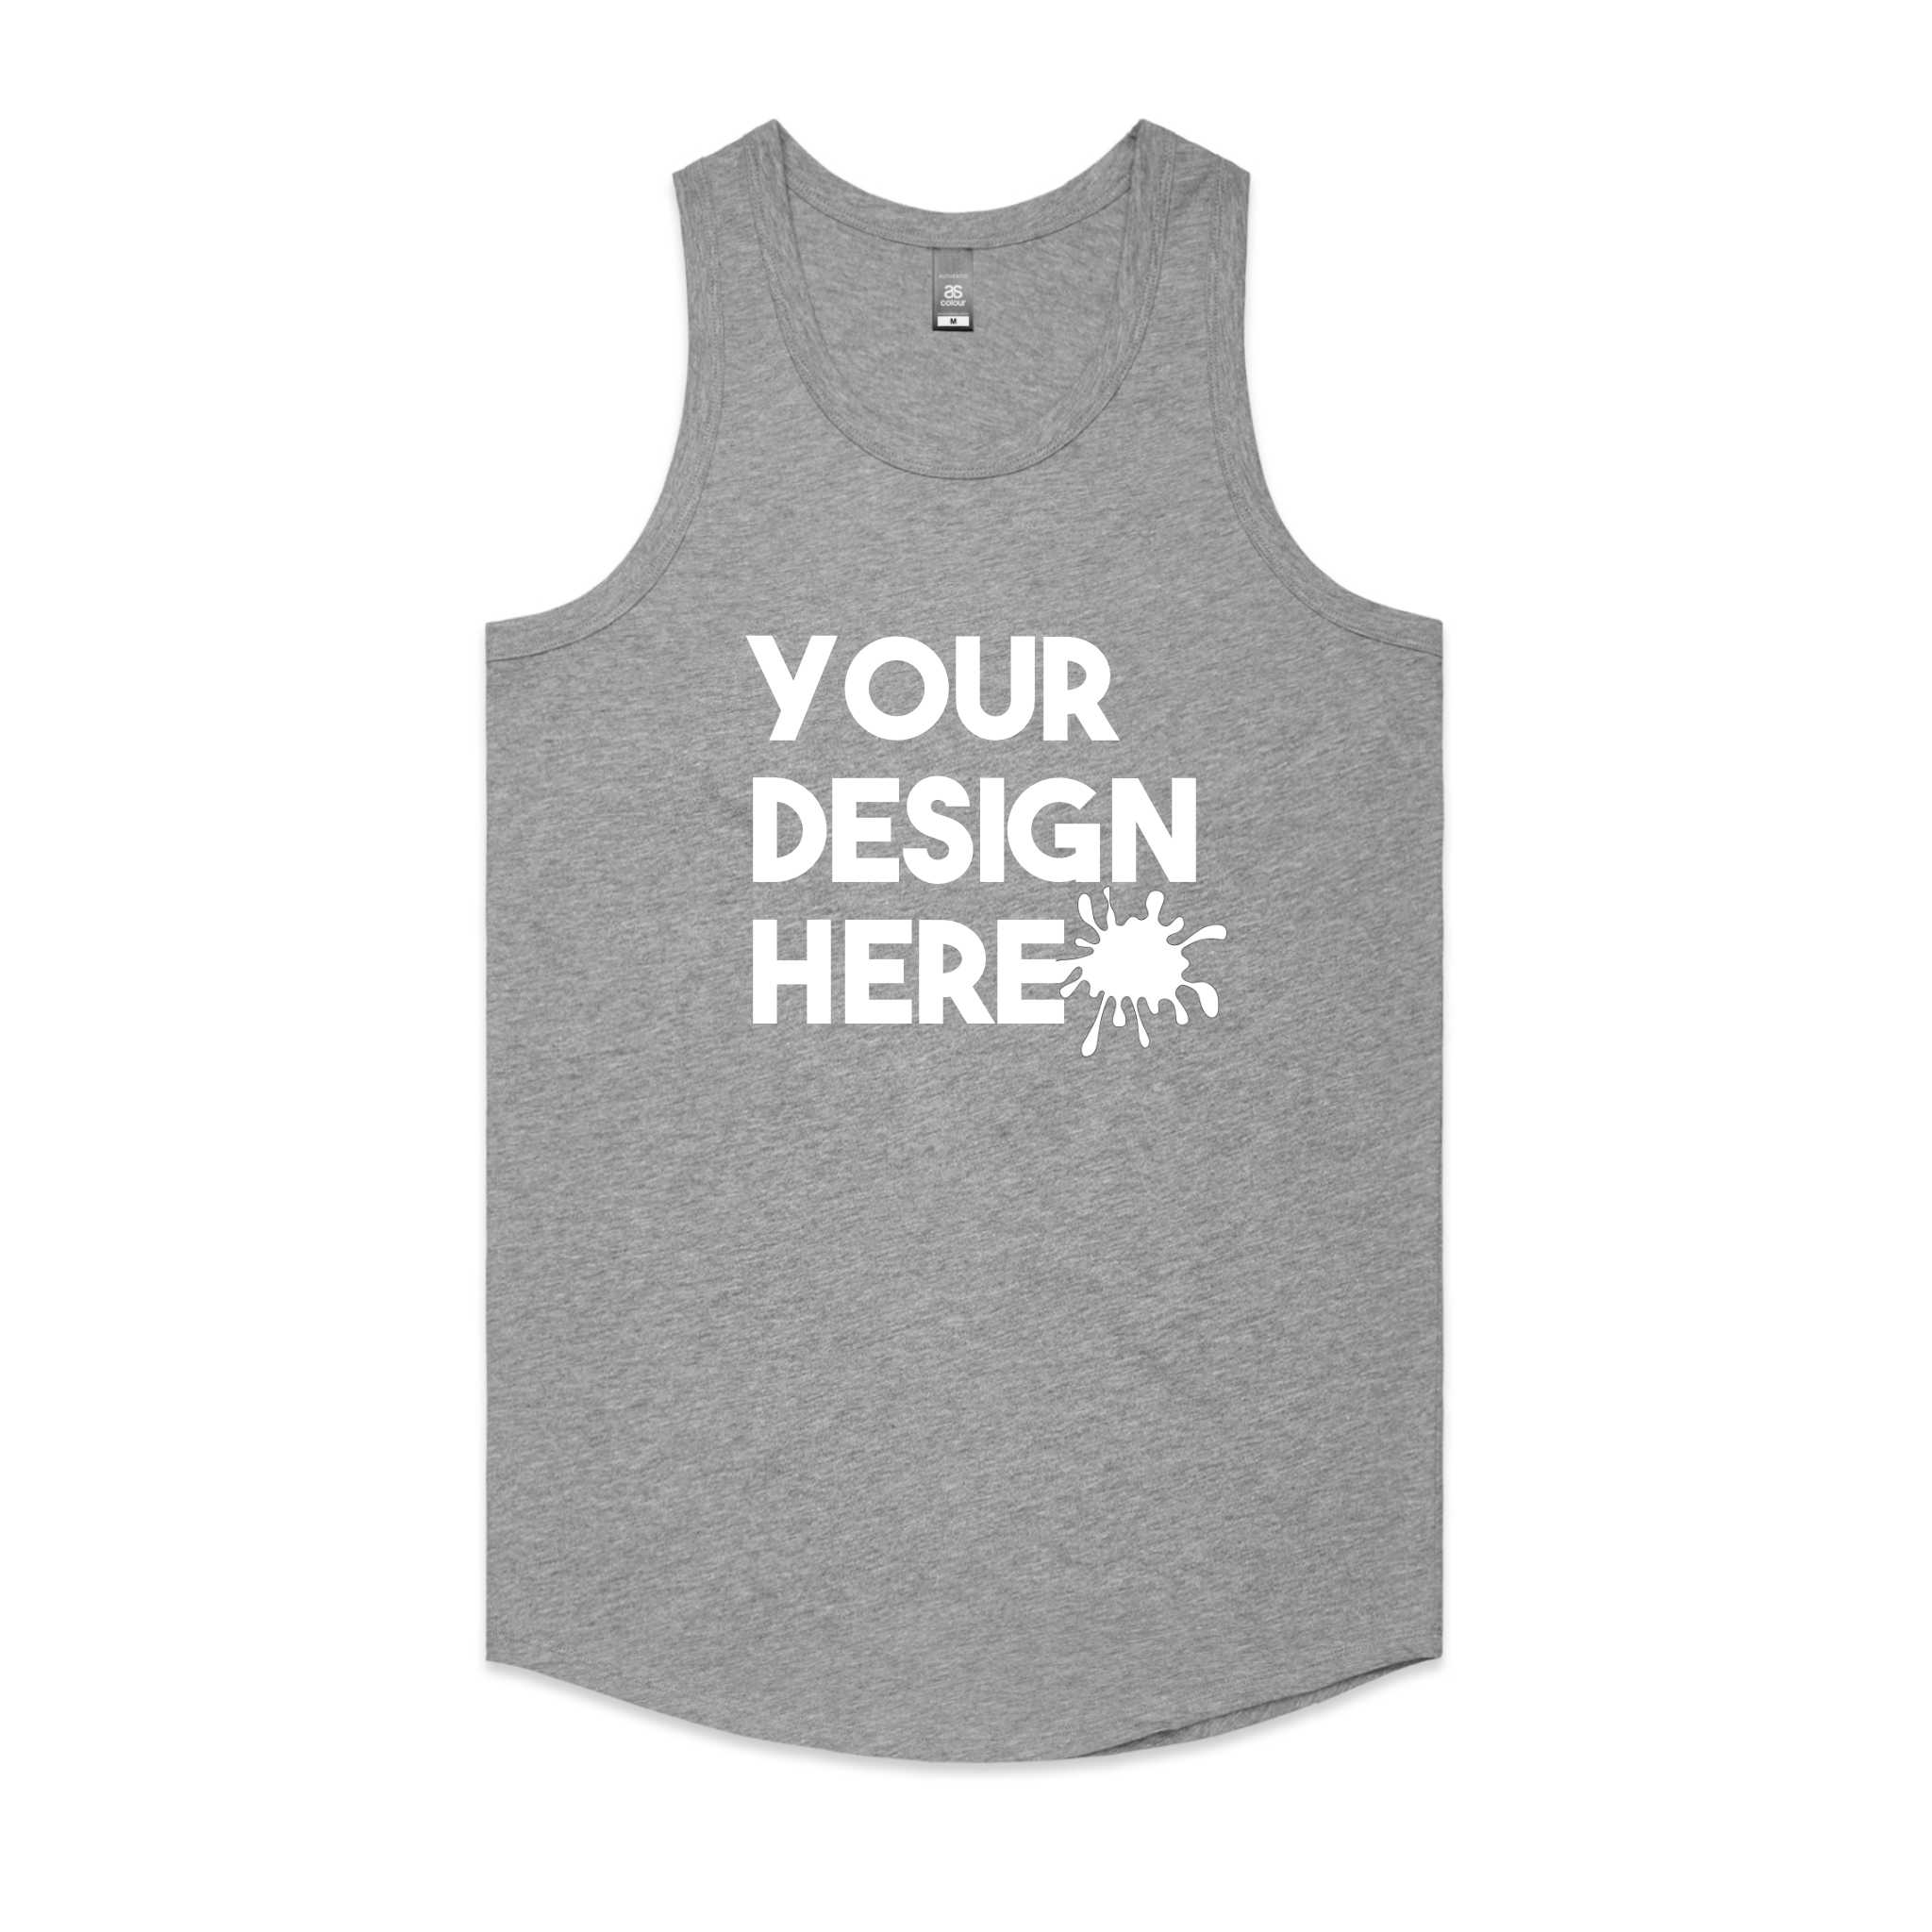 Customized tank tops athletic heather